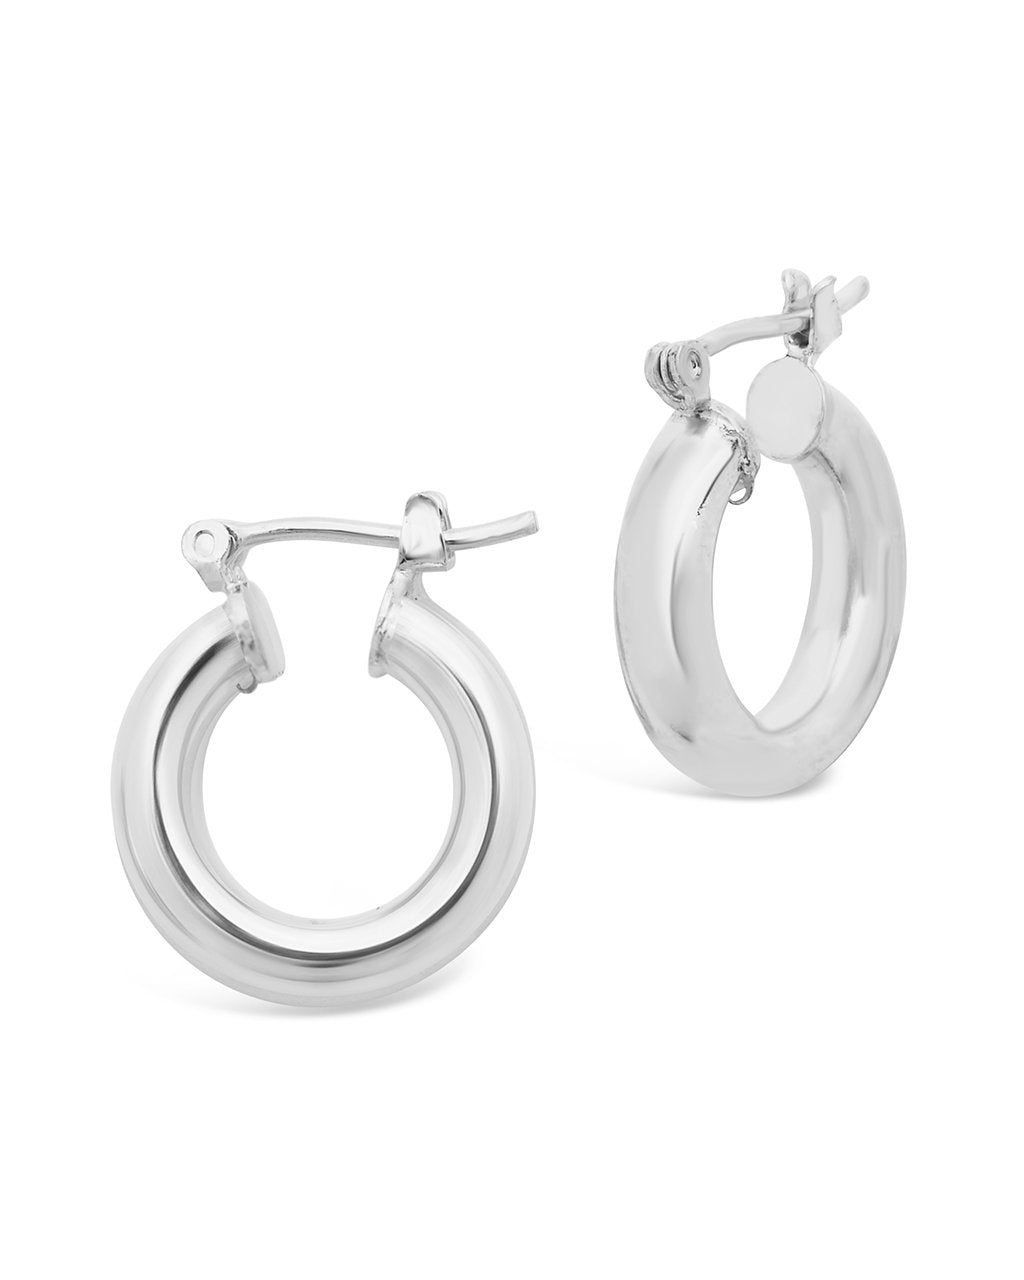 Chunky Tube Hoops Earring Sterling Forever Silver Small (0.75") 